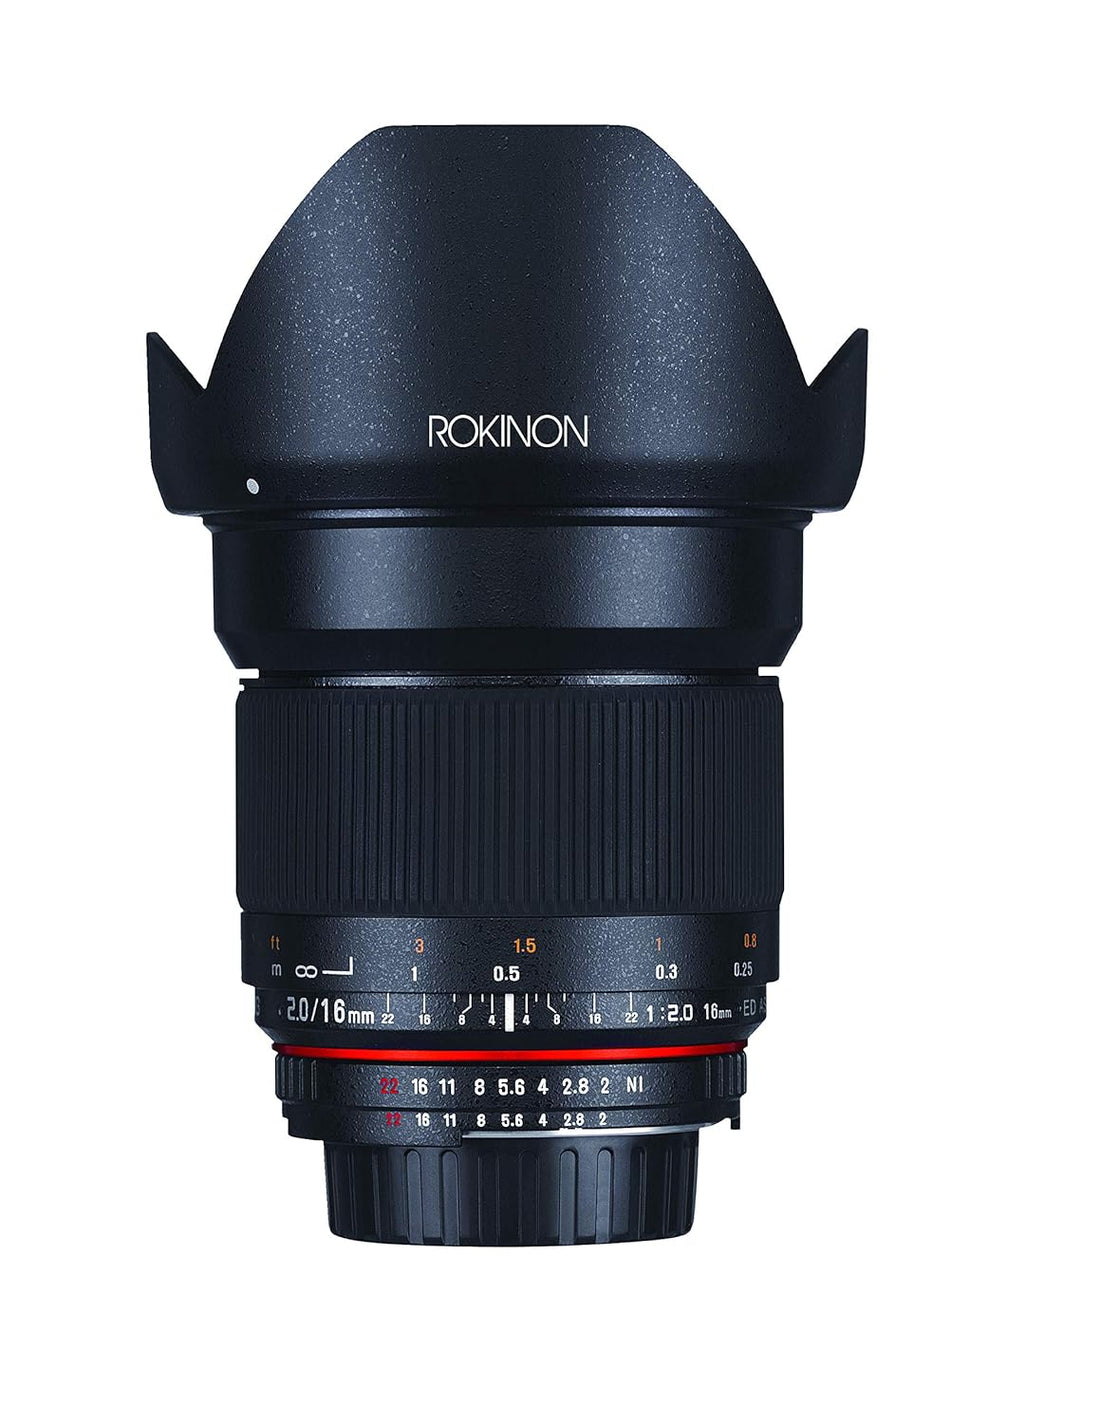 Rokinon 16M-C 16mm f/2.0 Aspherical Wide Angle Lens for Canon EF Cameras (Black)